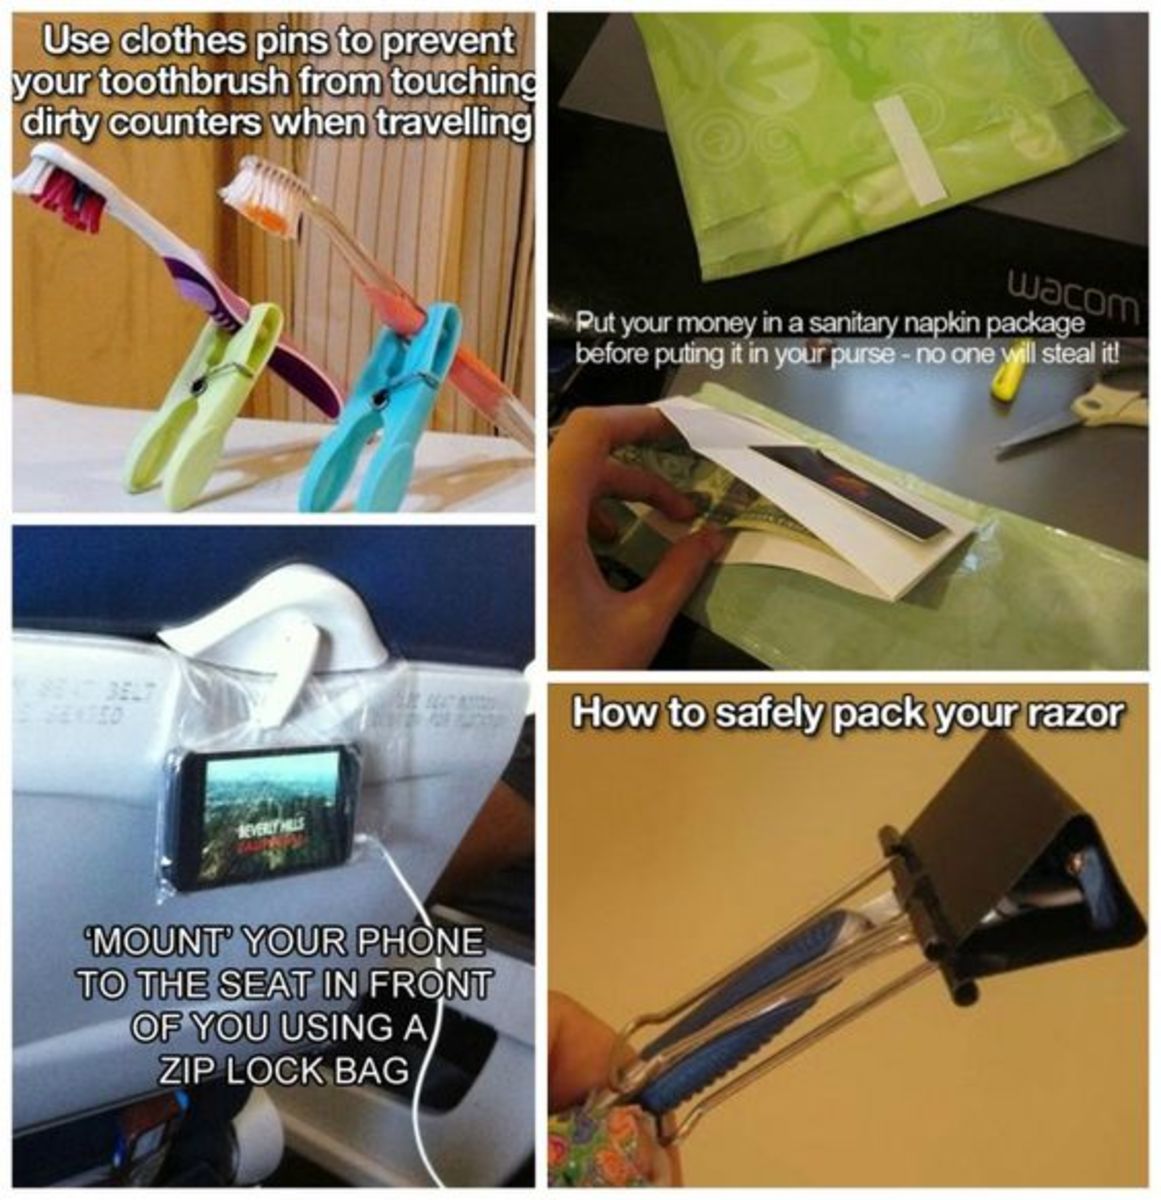 Here are a bunch of hacks for traveling that use simple items like clothespins and zip-closure bags.